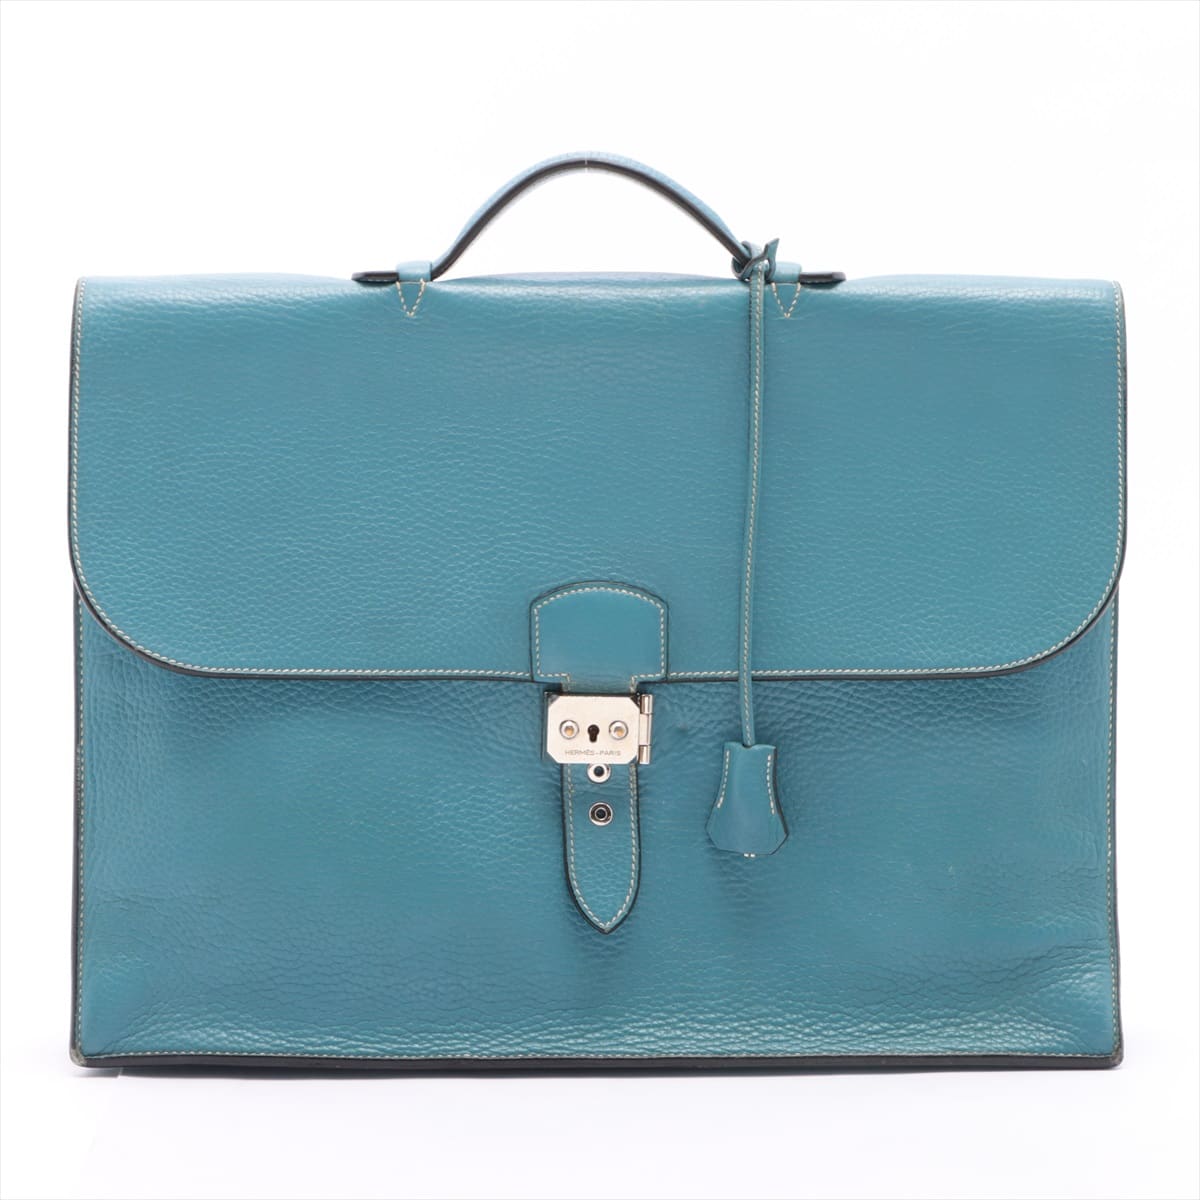 Hermès Sac a depeches 40 Taurillon Clemence Blue jean Silver Metal fittings The engraving is not clear